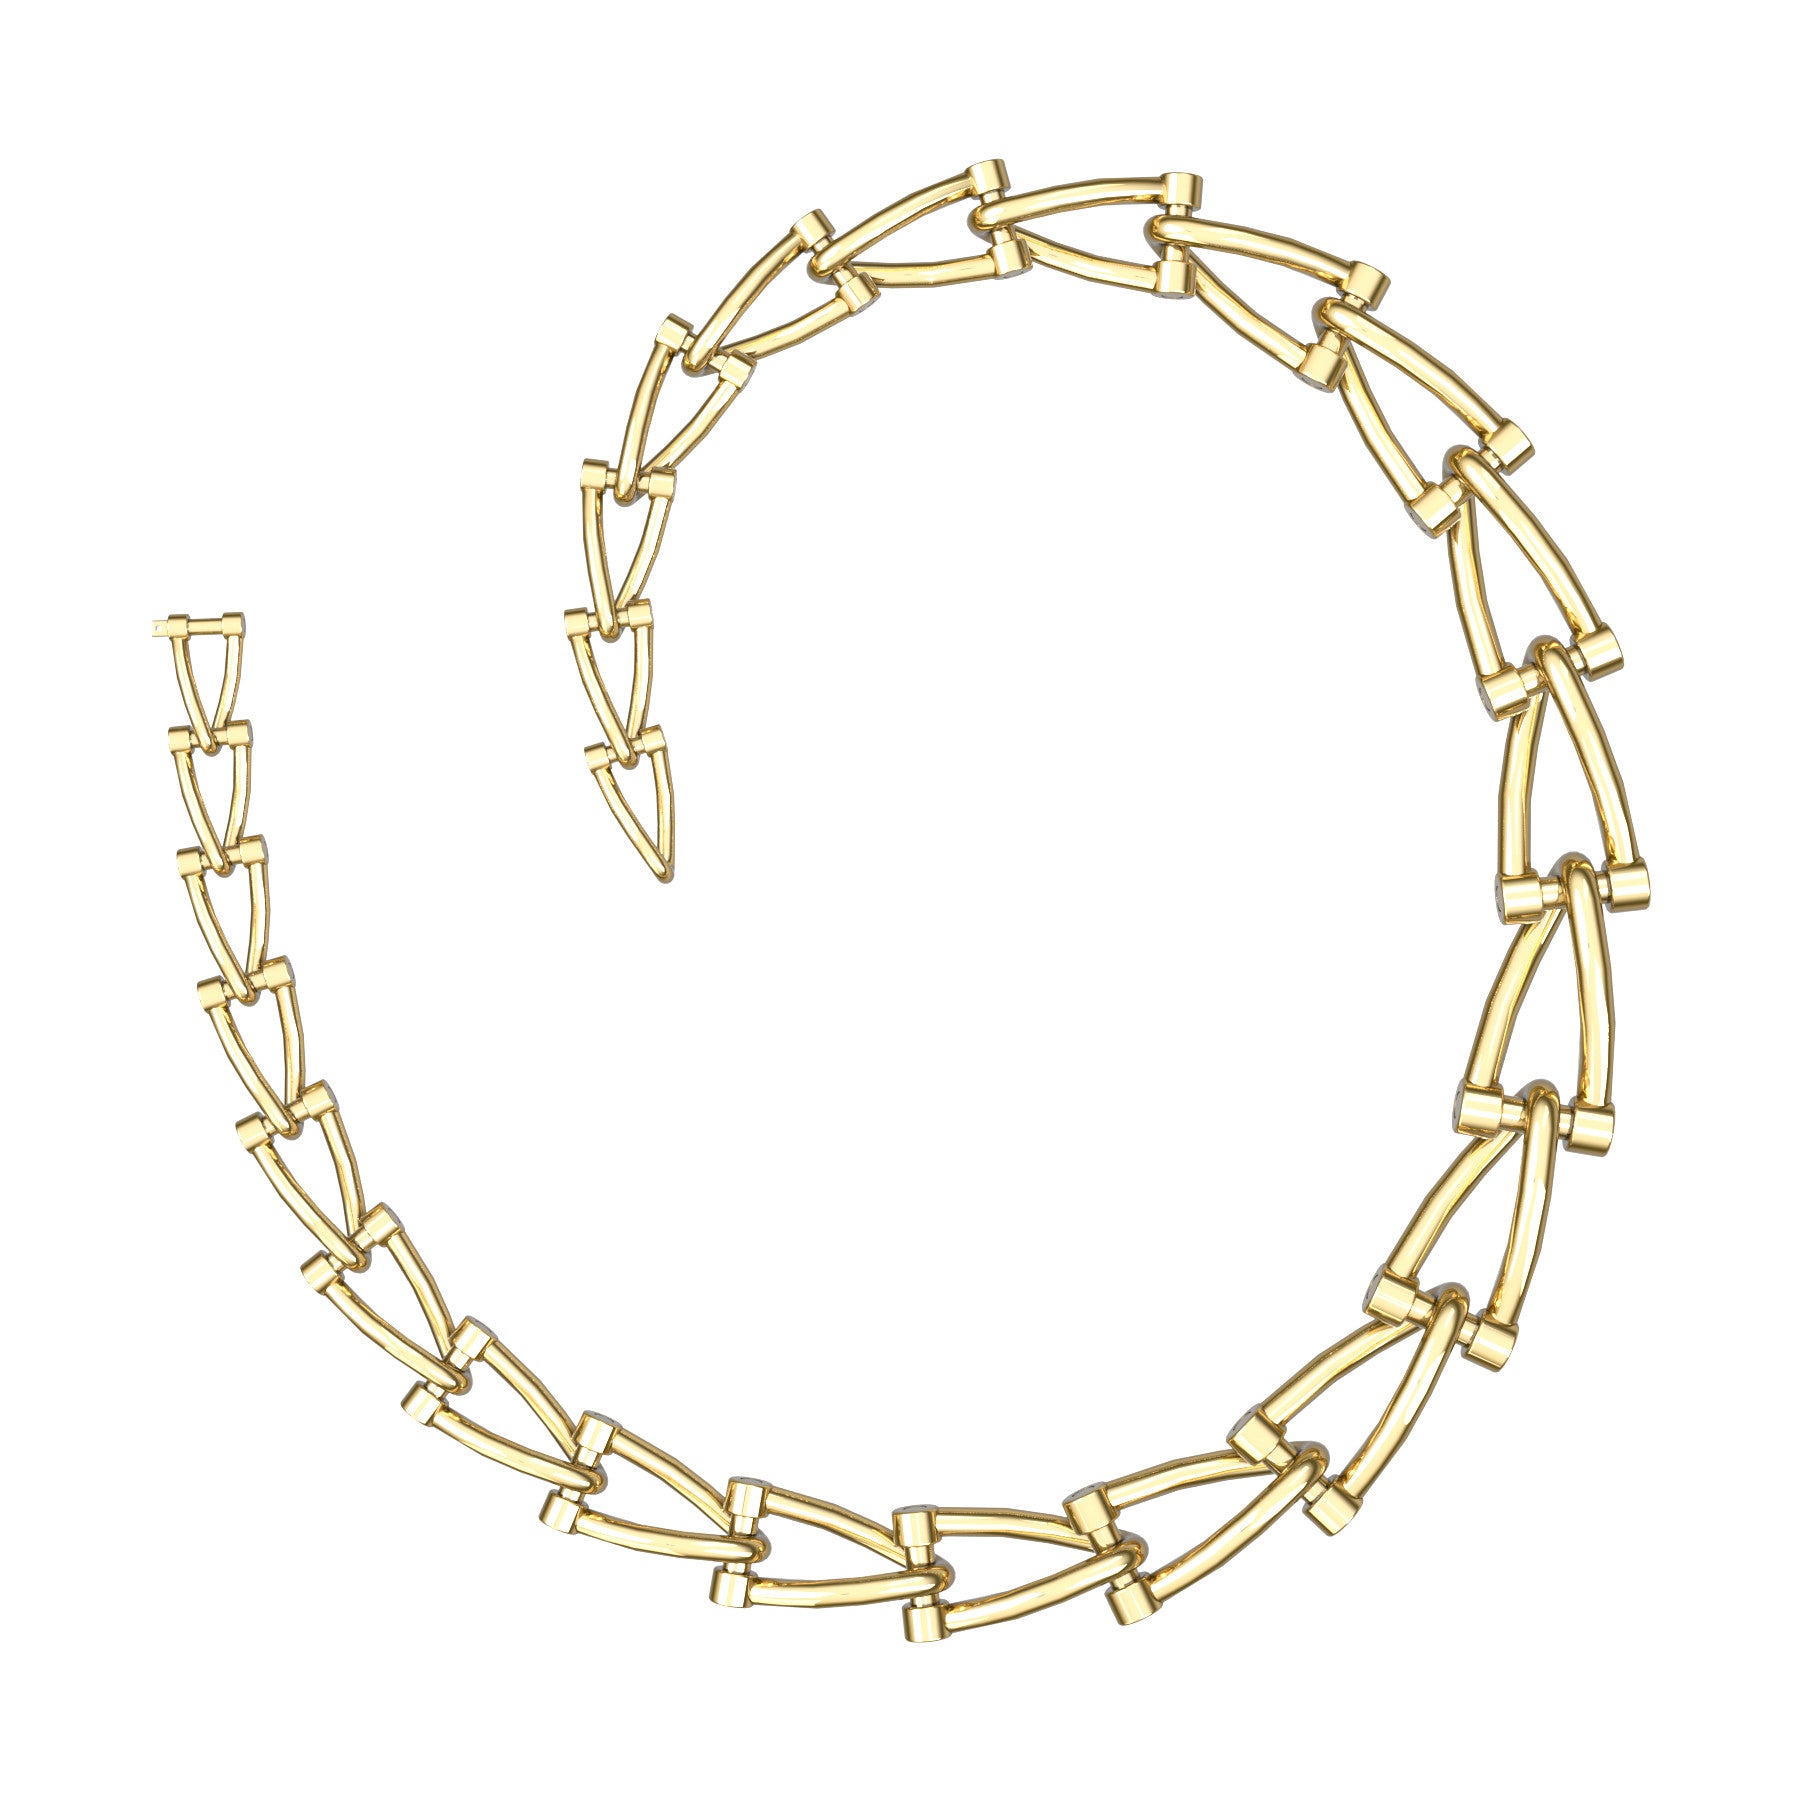 marine links necklace, 18 K yellow gold, weight about 135 to 162 g (4.76 to 5.71 oz), width 7,8 to 15,7 mm max